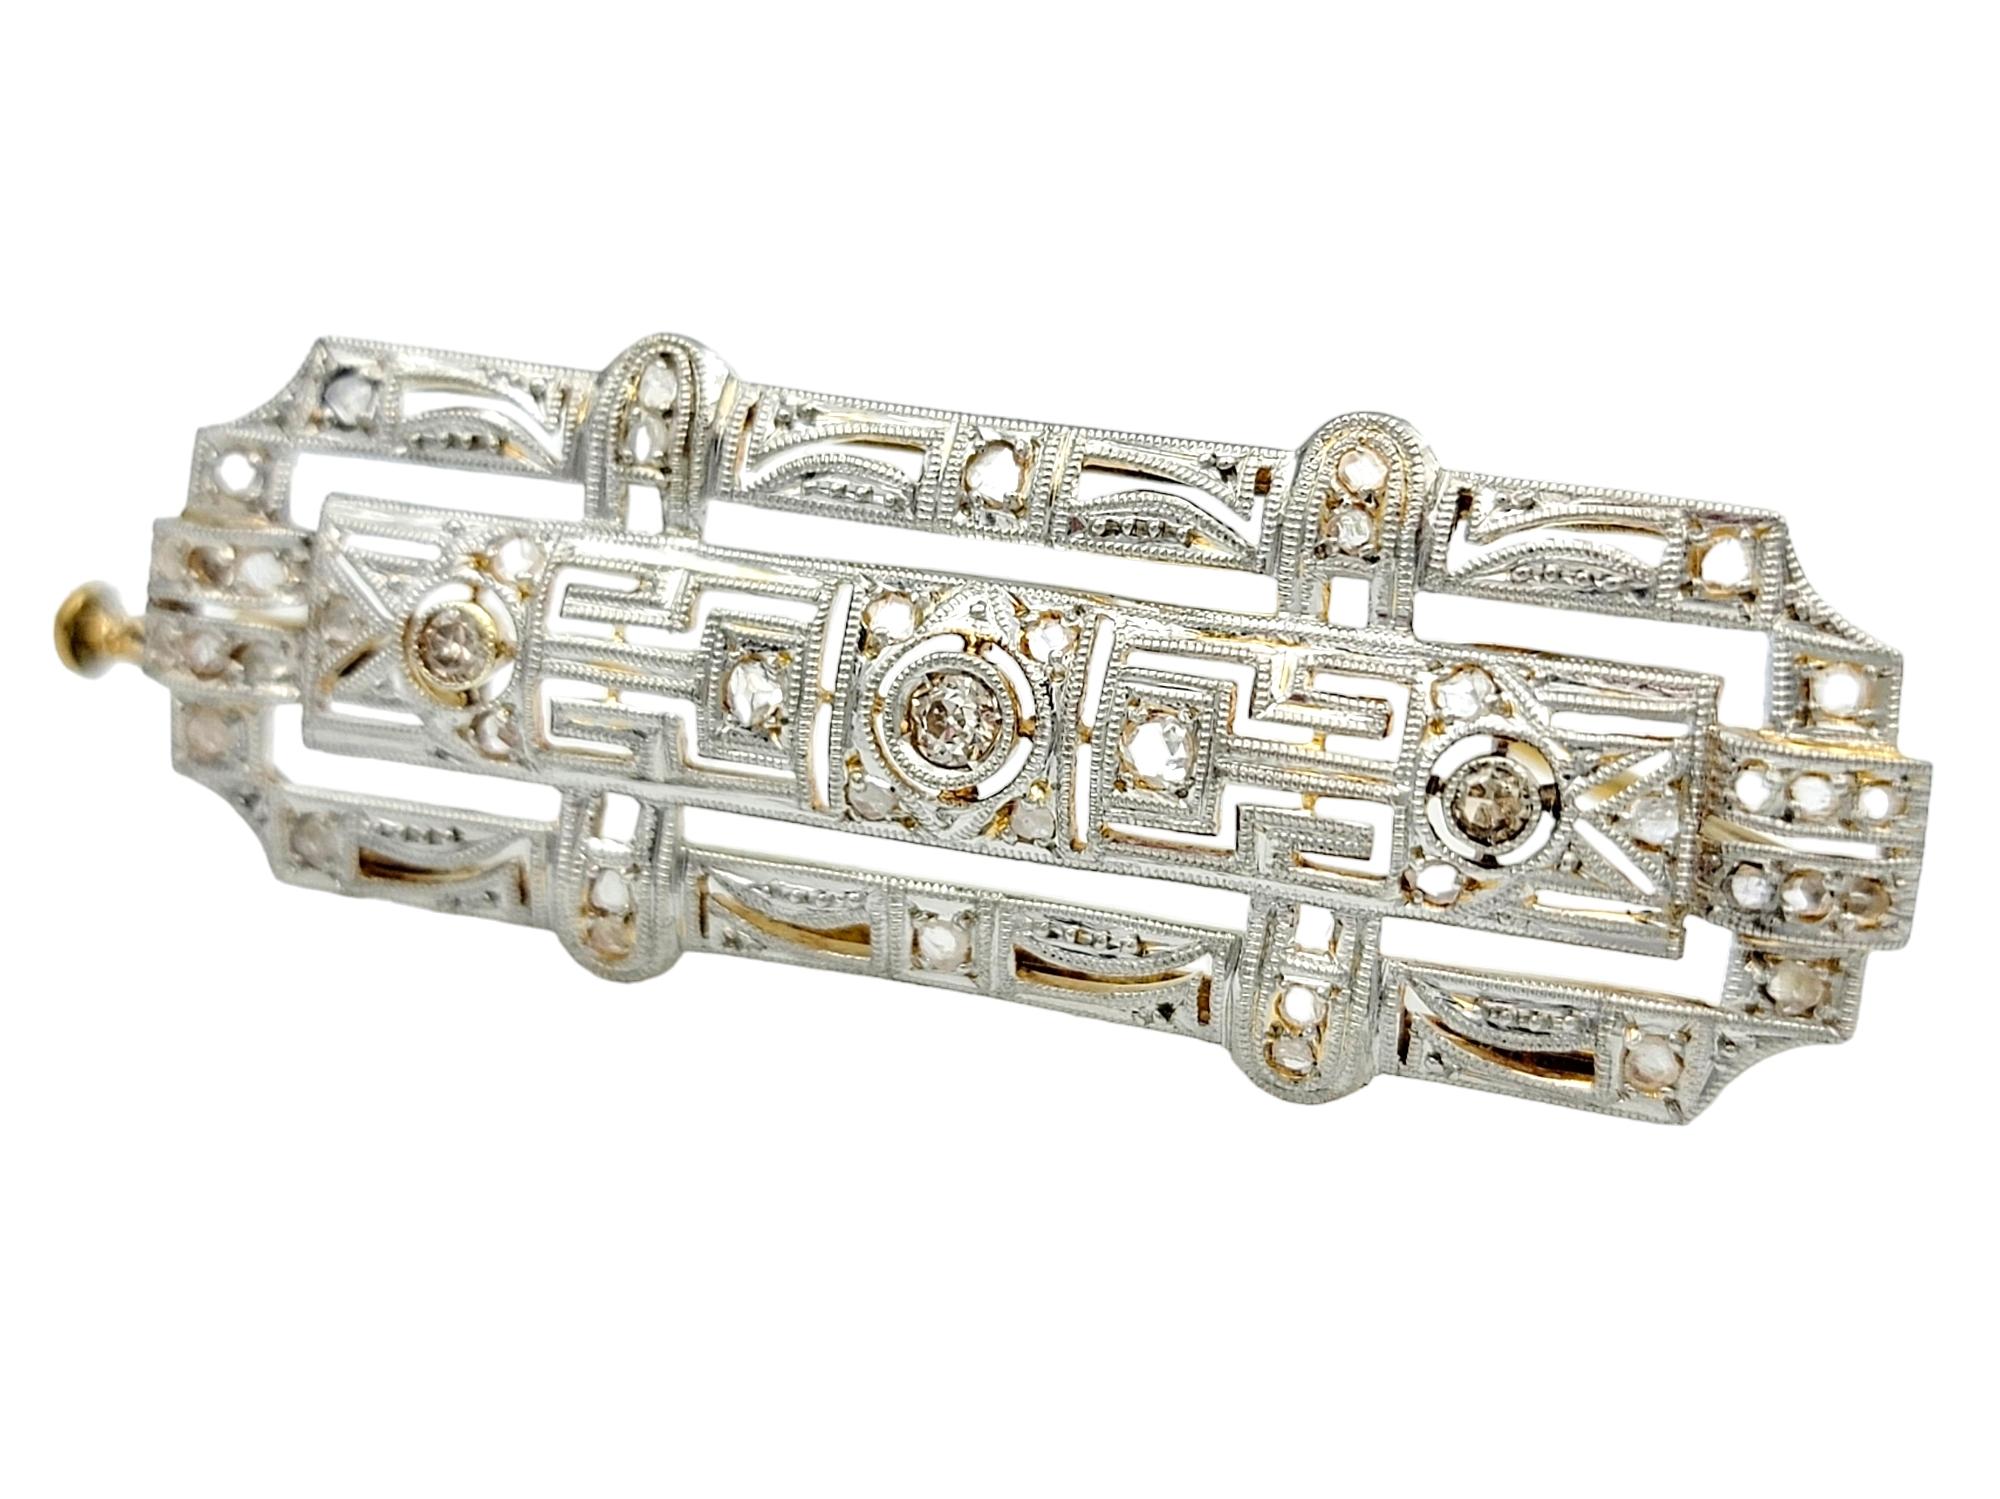 Indulge in the exquisite charm of this vintage art deco brooch, a dazzling display of elegance. Crafted in a captivating assortment of 18 karat yellow gold and platinum, the brooch is adorned with a meticulous arrangement of Old European, rose, and